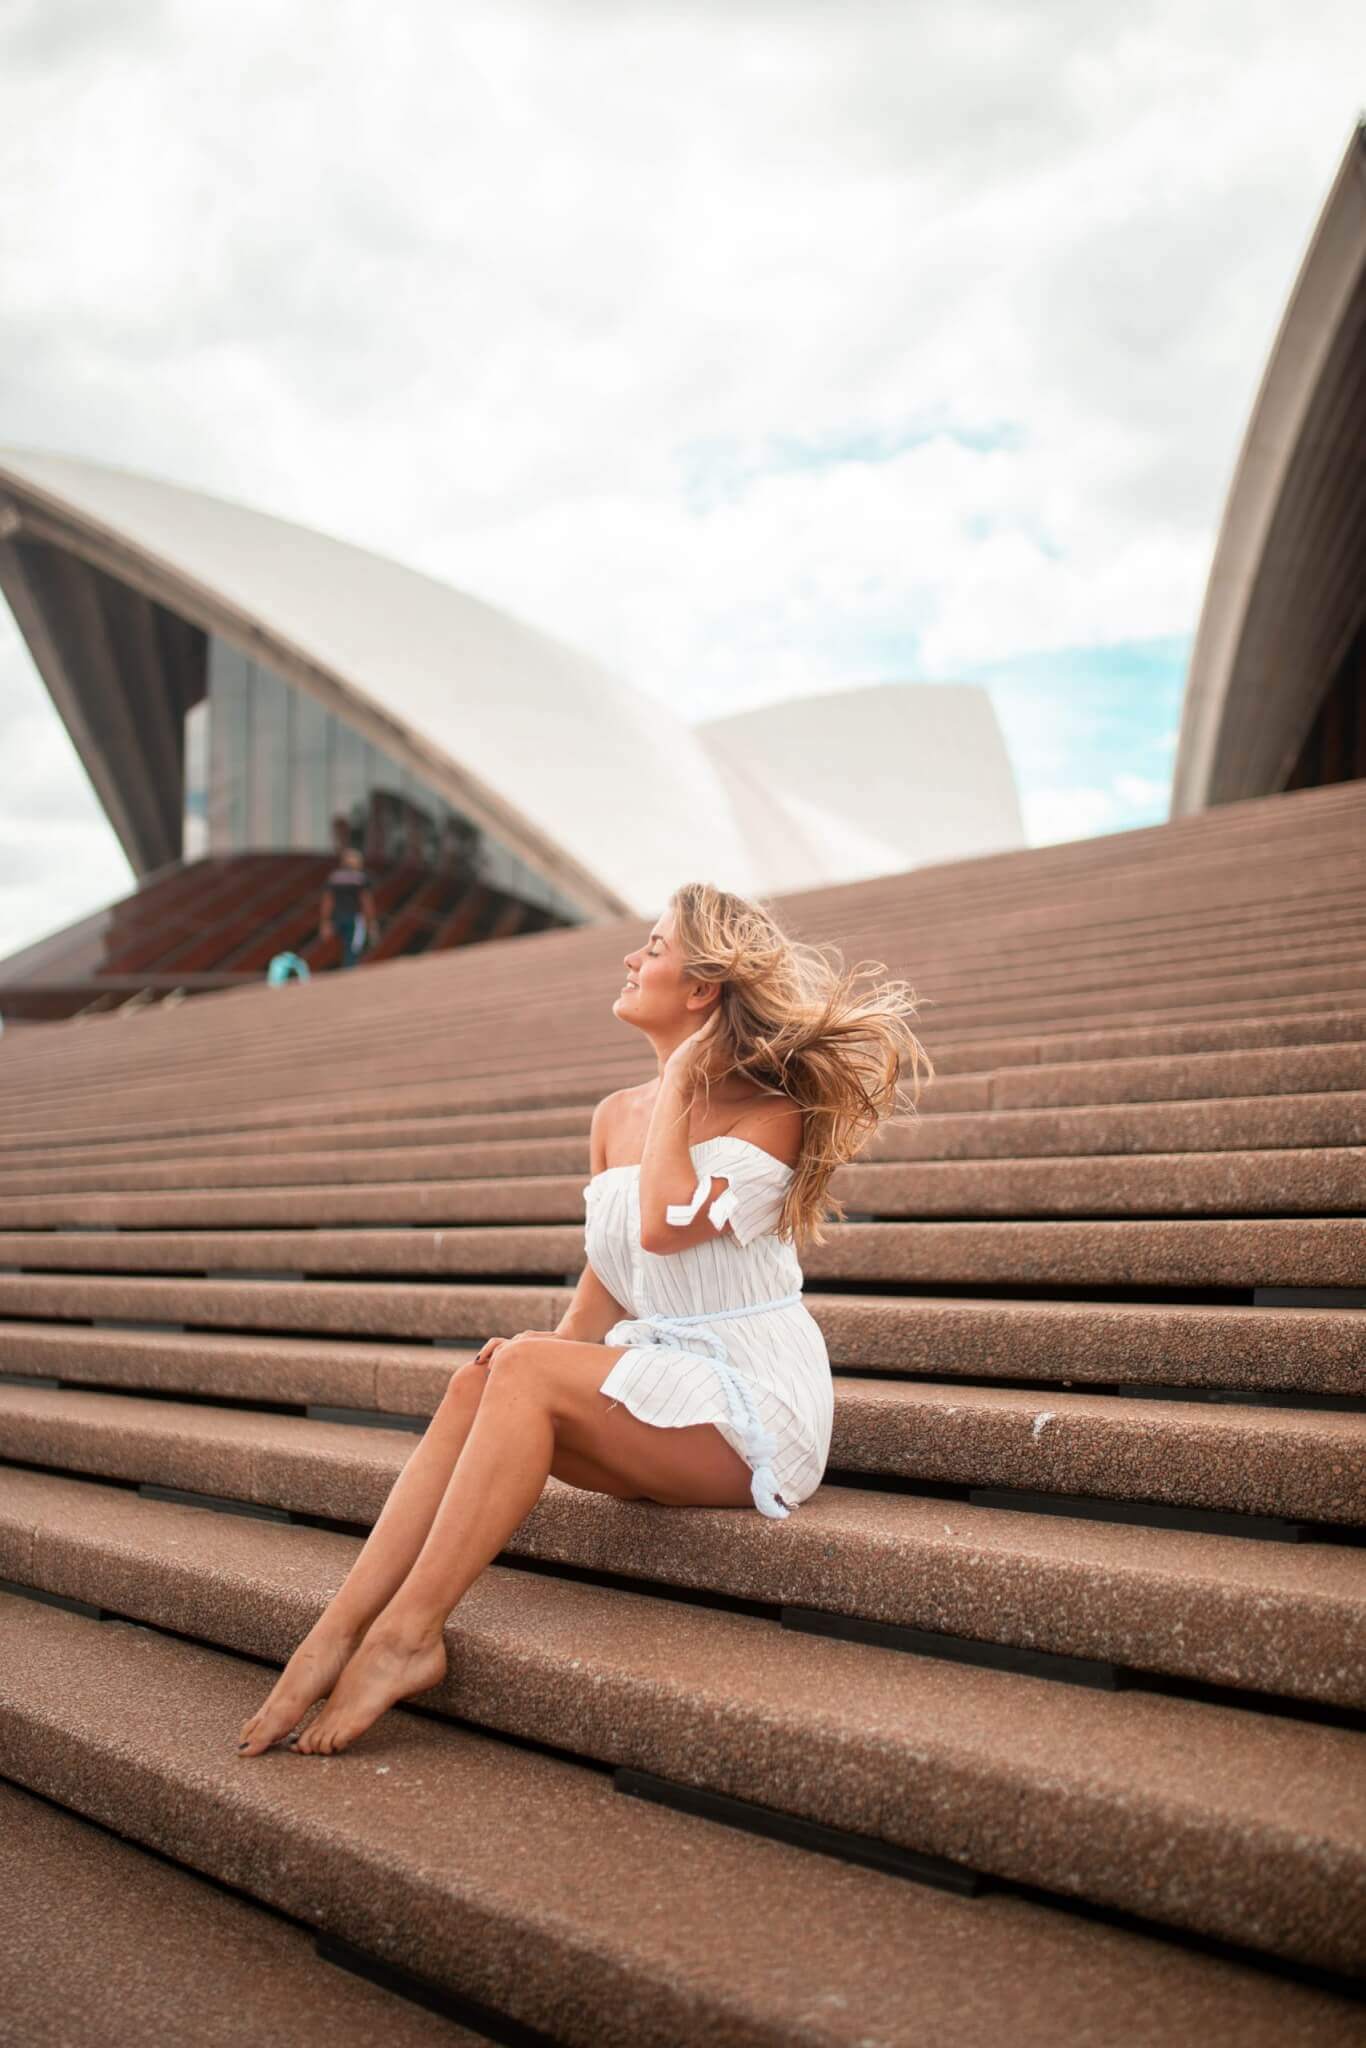 25 things to do in Sydney, Australia